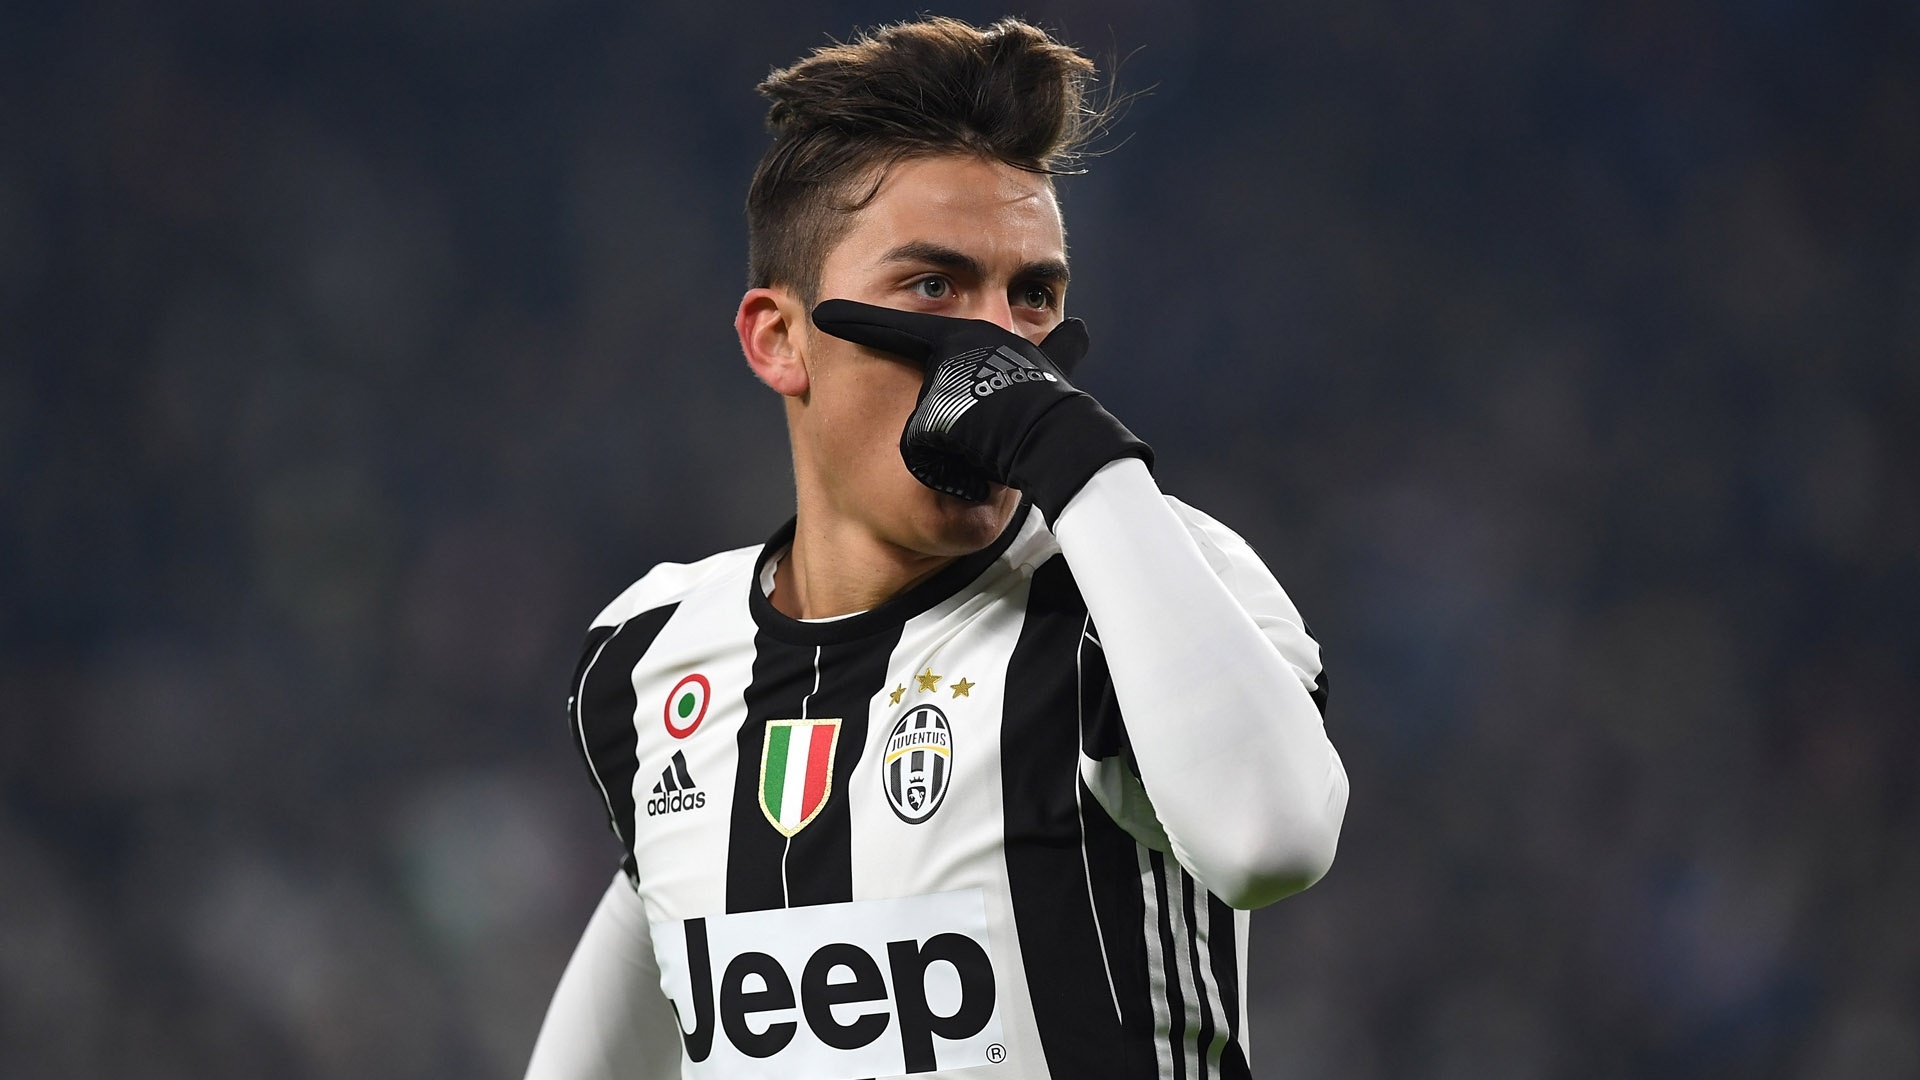 Dybala: Known for his powerful and accurate shots from outside the box, dribbling skills, balance, and close control in limited spaces, as well as his ability to beat opponents in one on one situations and protect or hold up the ball for teammates. 1920x1080 Full HD Wallpaper.